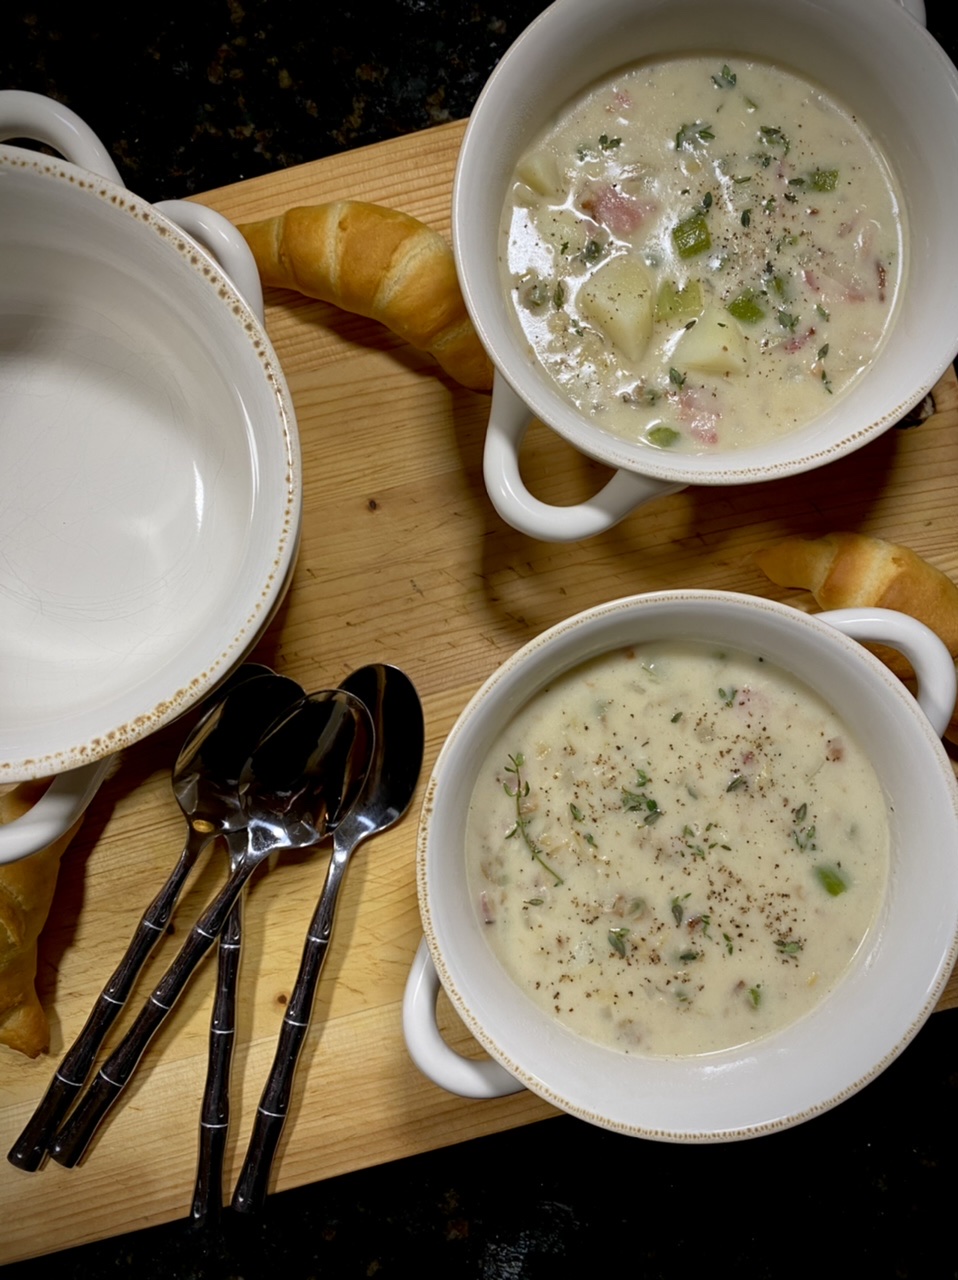 71C06D00 89F8 4242 A988 ACE2210D1467 - How to Make New England Clam Chowder from Scratch